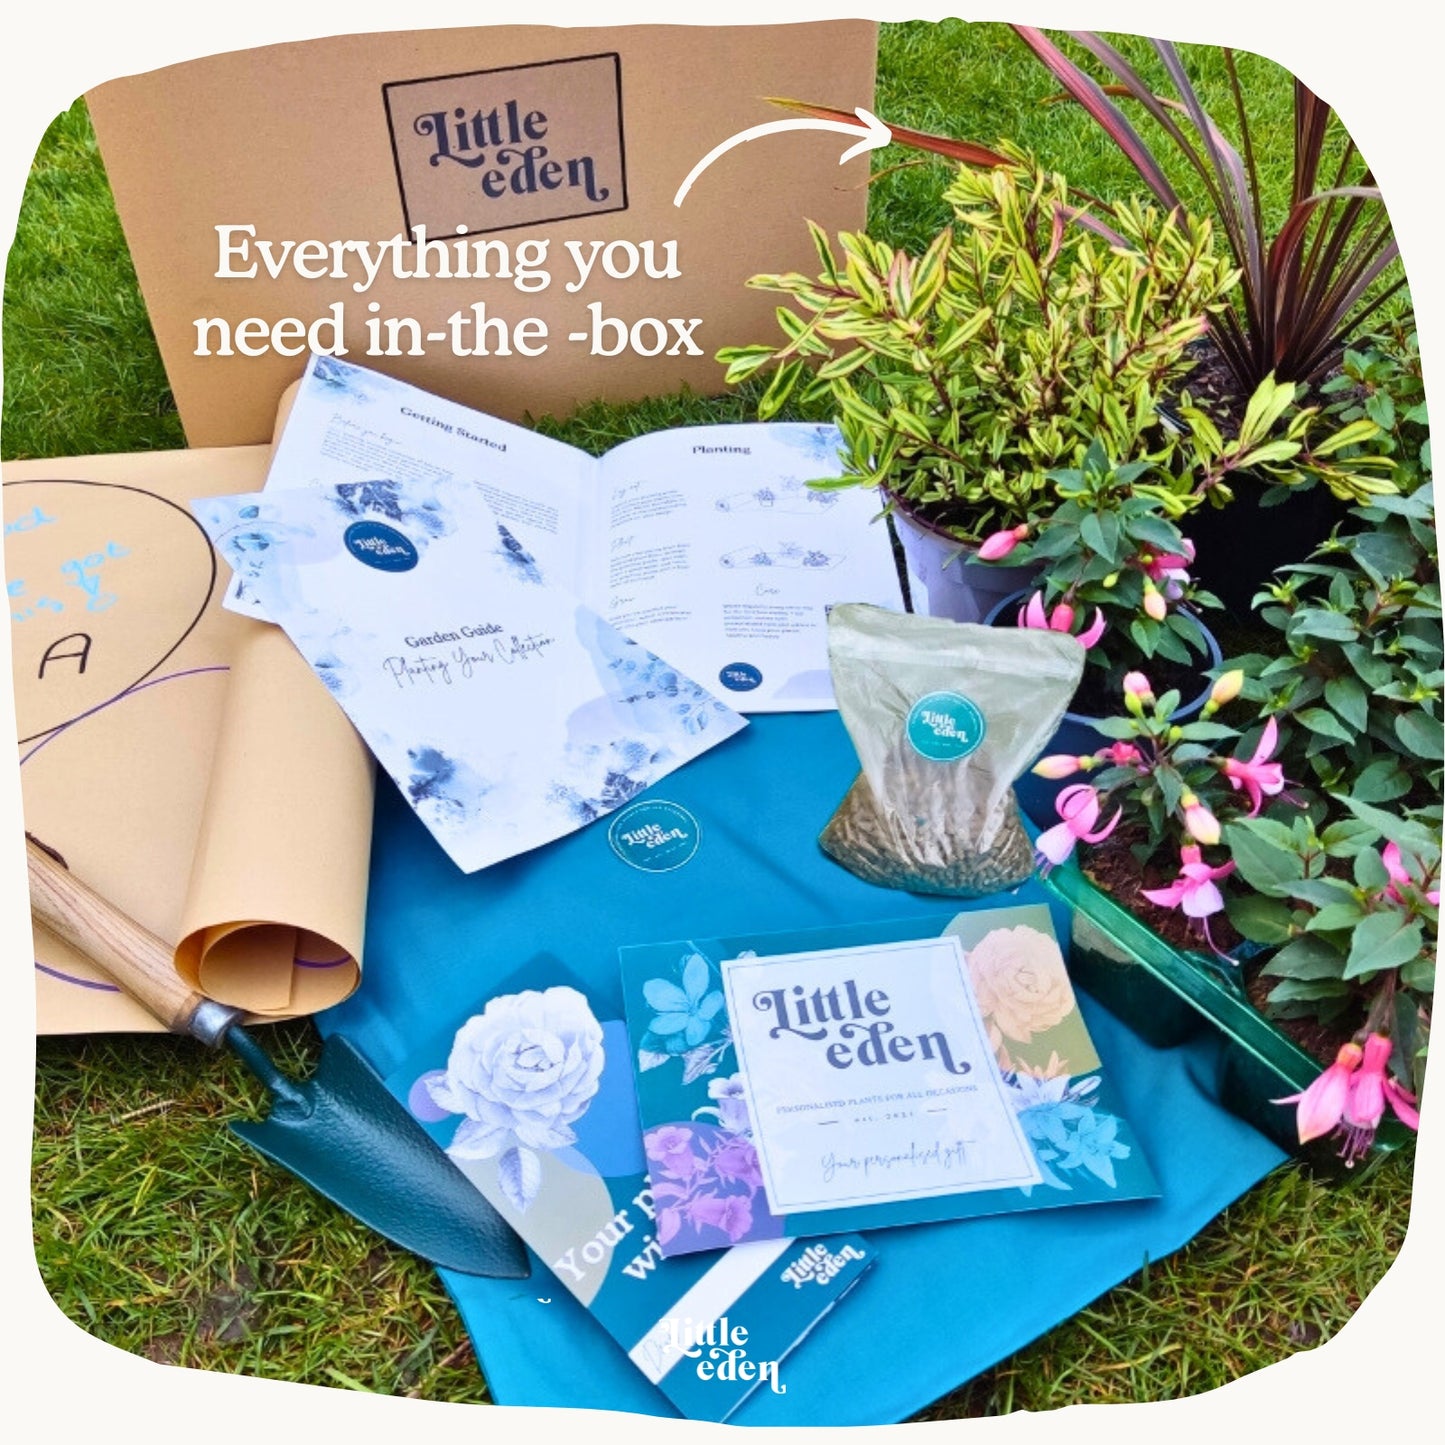 Your personalised garden in-a-box